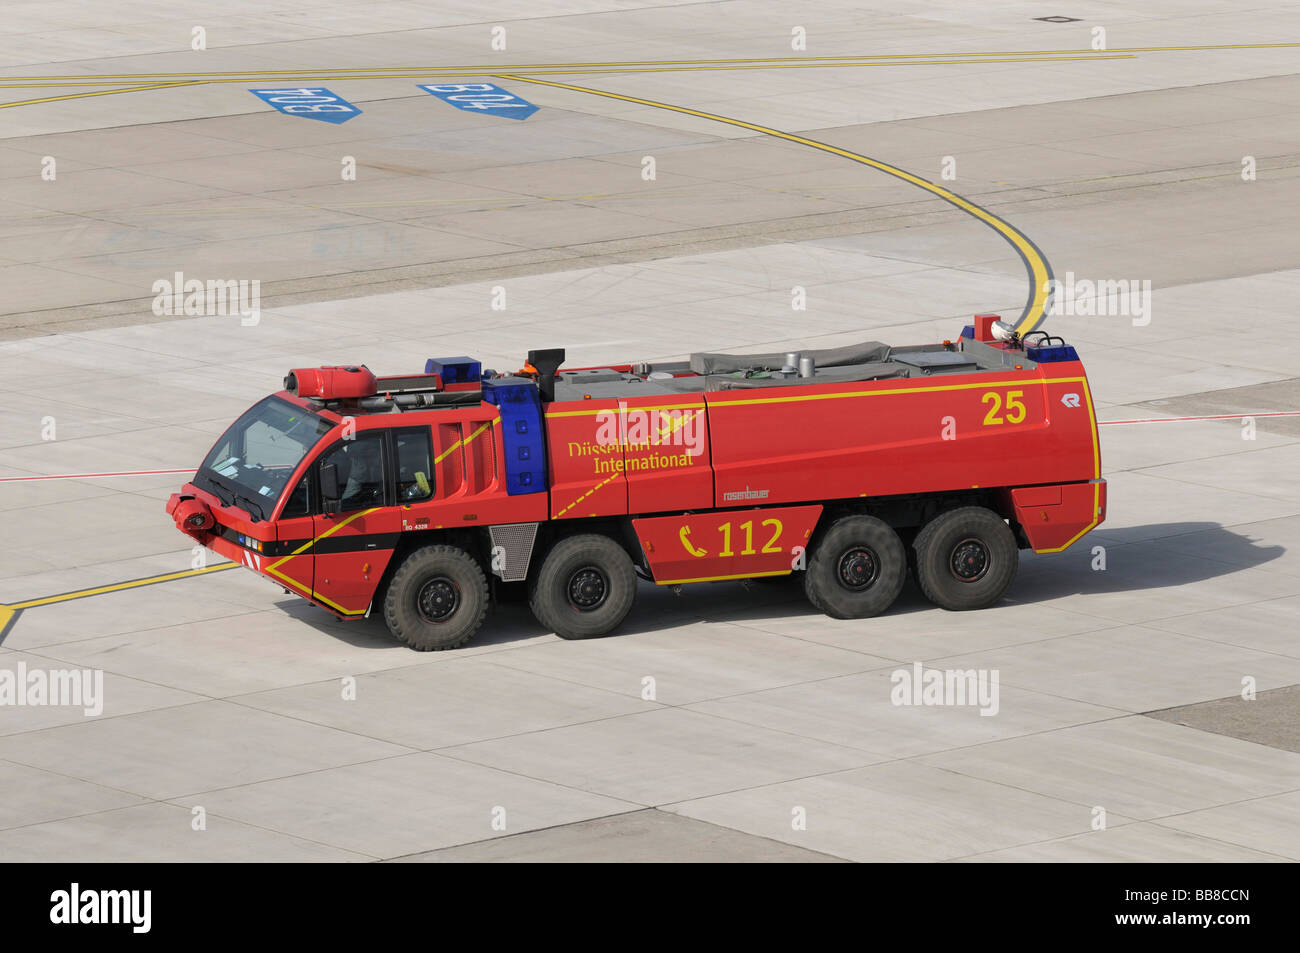 Airport fire engine from the company Rosenbauer on the runway, fire-brigade, Duesseldorf International Airport, North Rhine-Wes Stock Photo